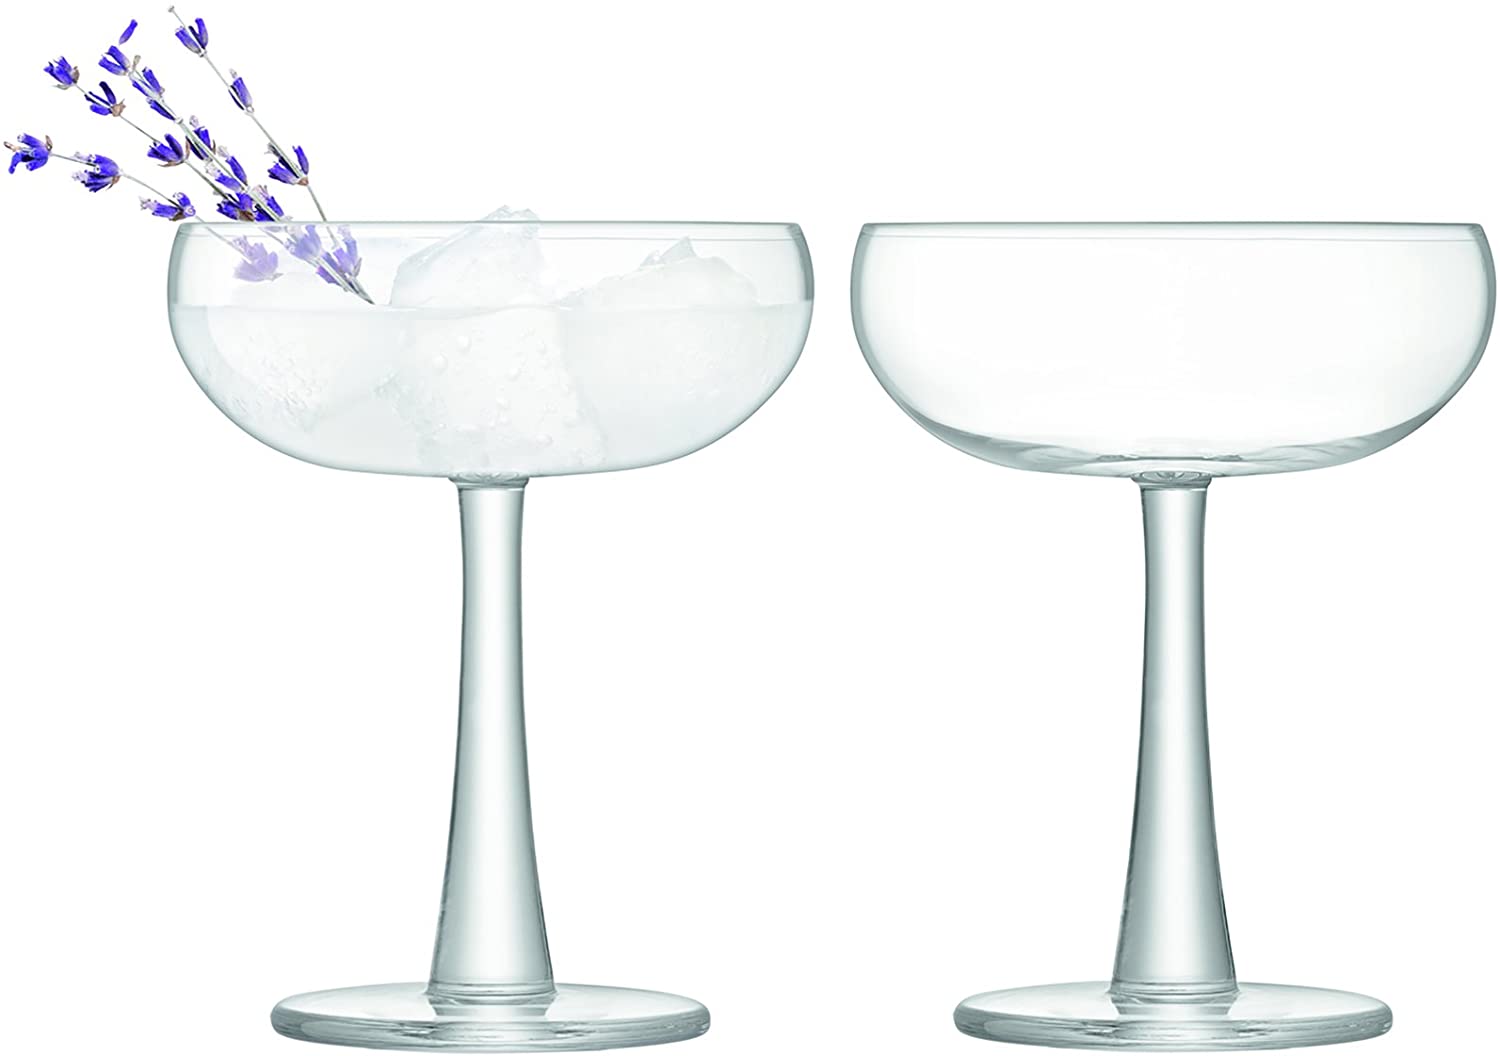 LSA International Gin Coupe 280 ml Clear x 2, Set of 2